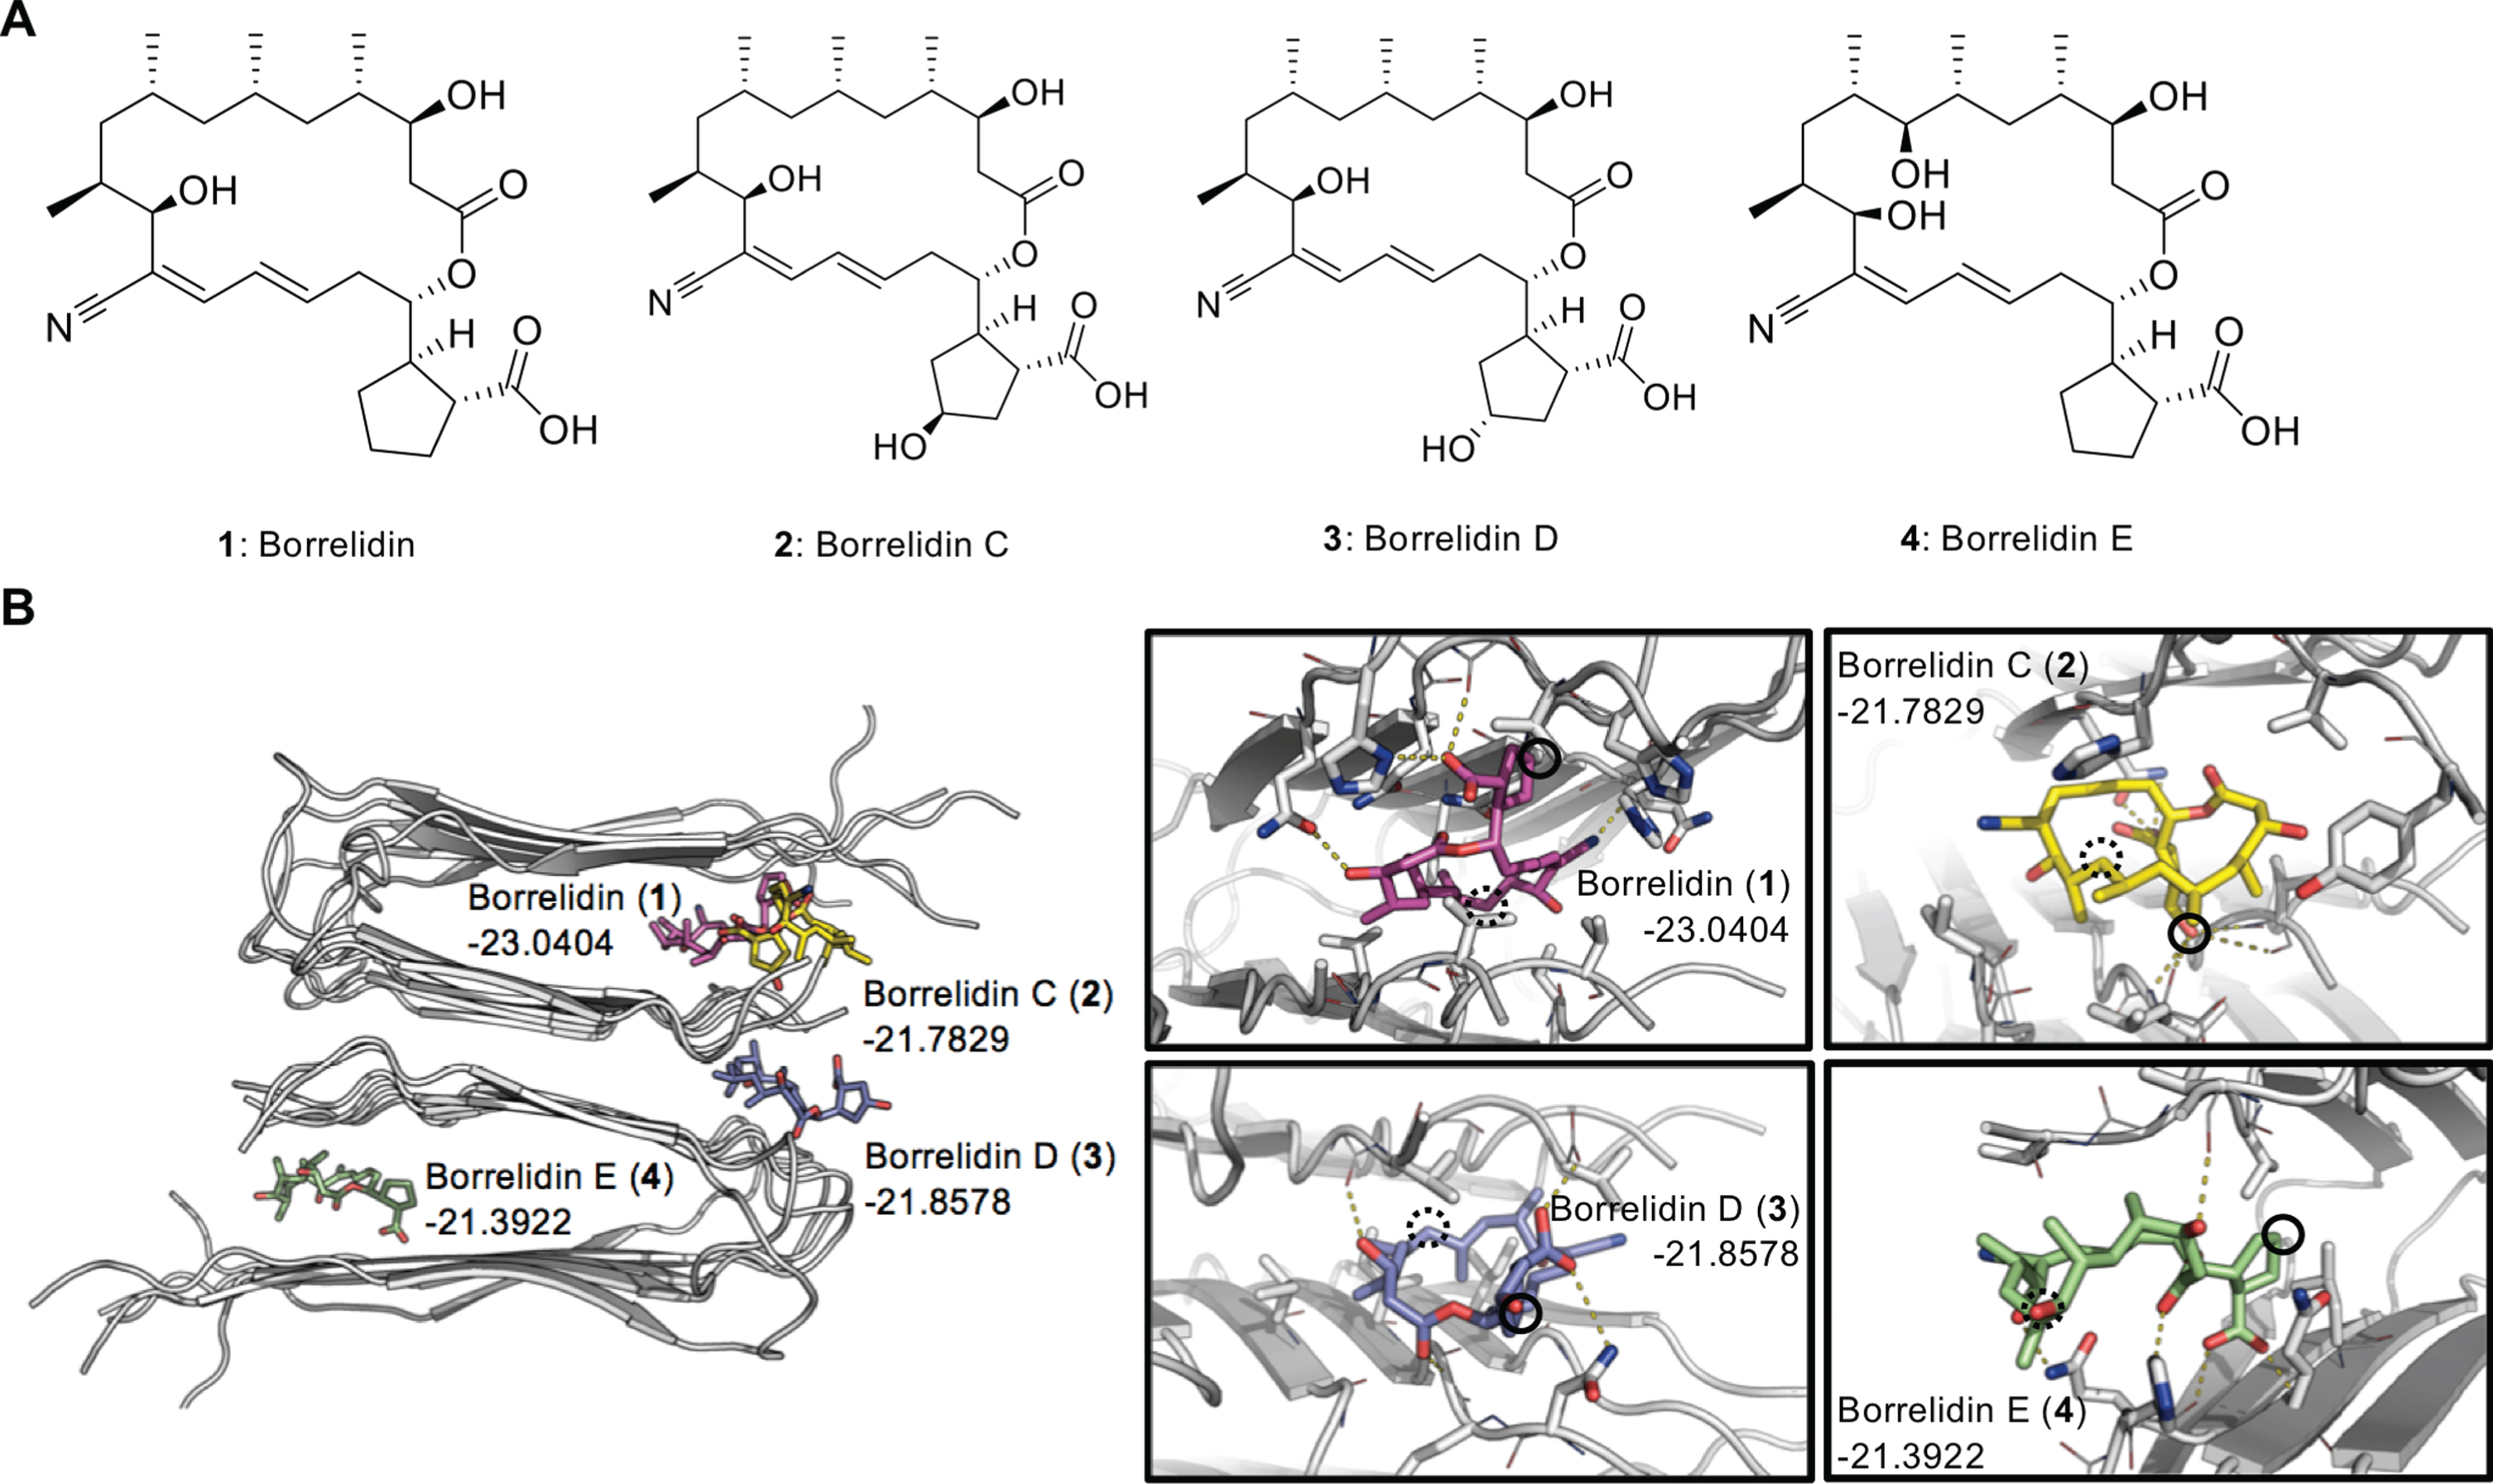 Docking simulation of borrelidins. A) Chemical structures of borrelidin (1) and borrelidins C-E (2–4) and (B) binding simulation of each compound to Aβ aggregates in docking model.